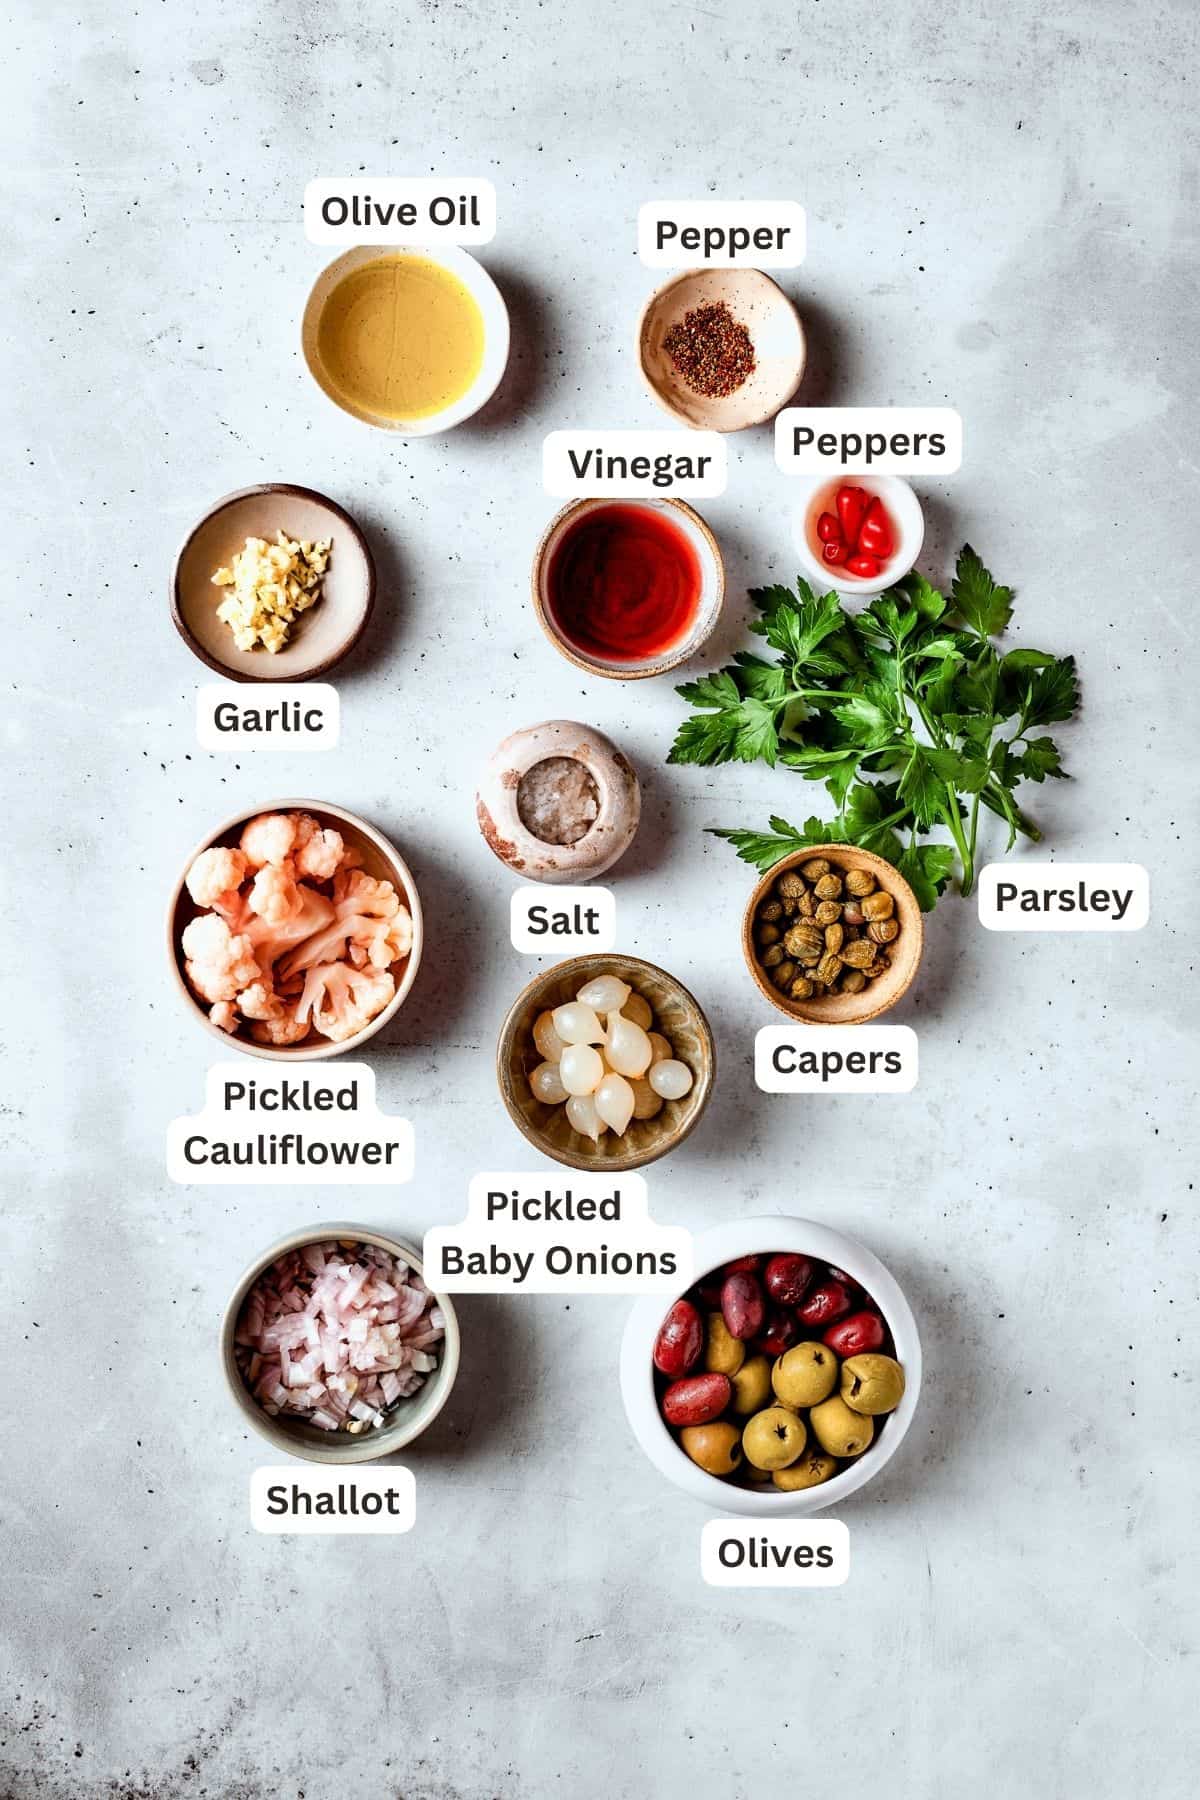 The ingredients for olive salad are shown: olives, peppers, pickled cauliflower, vinegar, parsley, capers, pickled baby onions, garlic, olive oil.